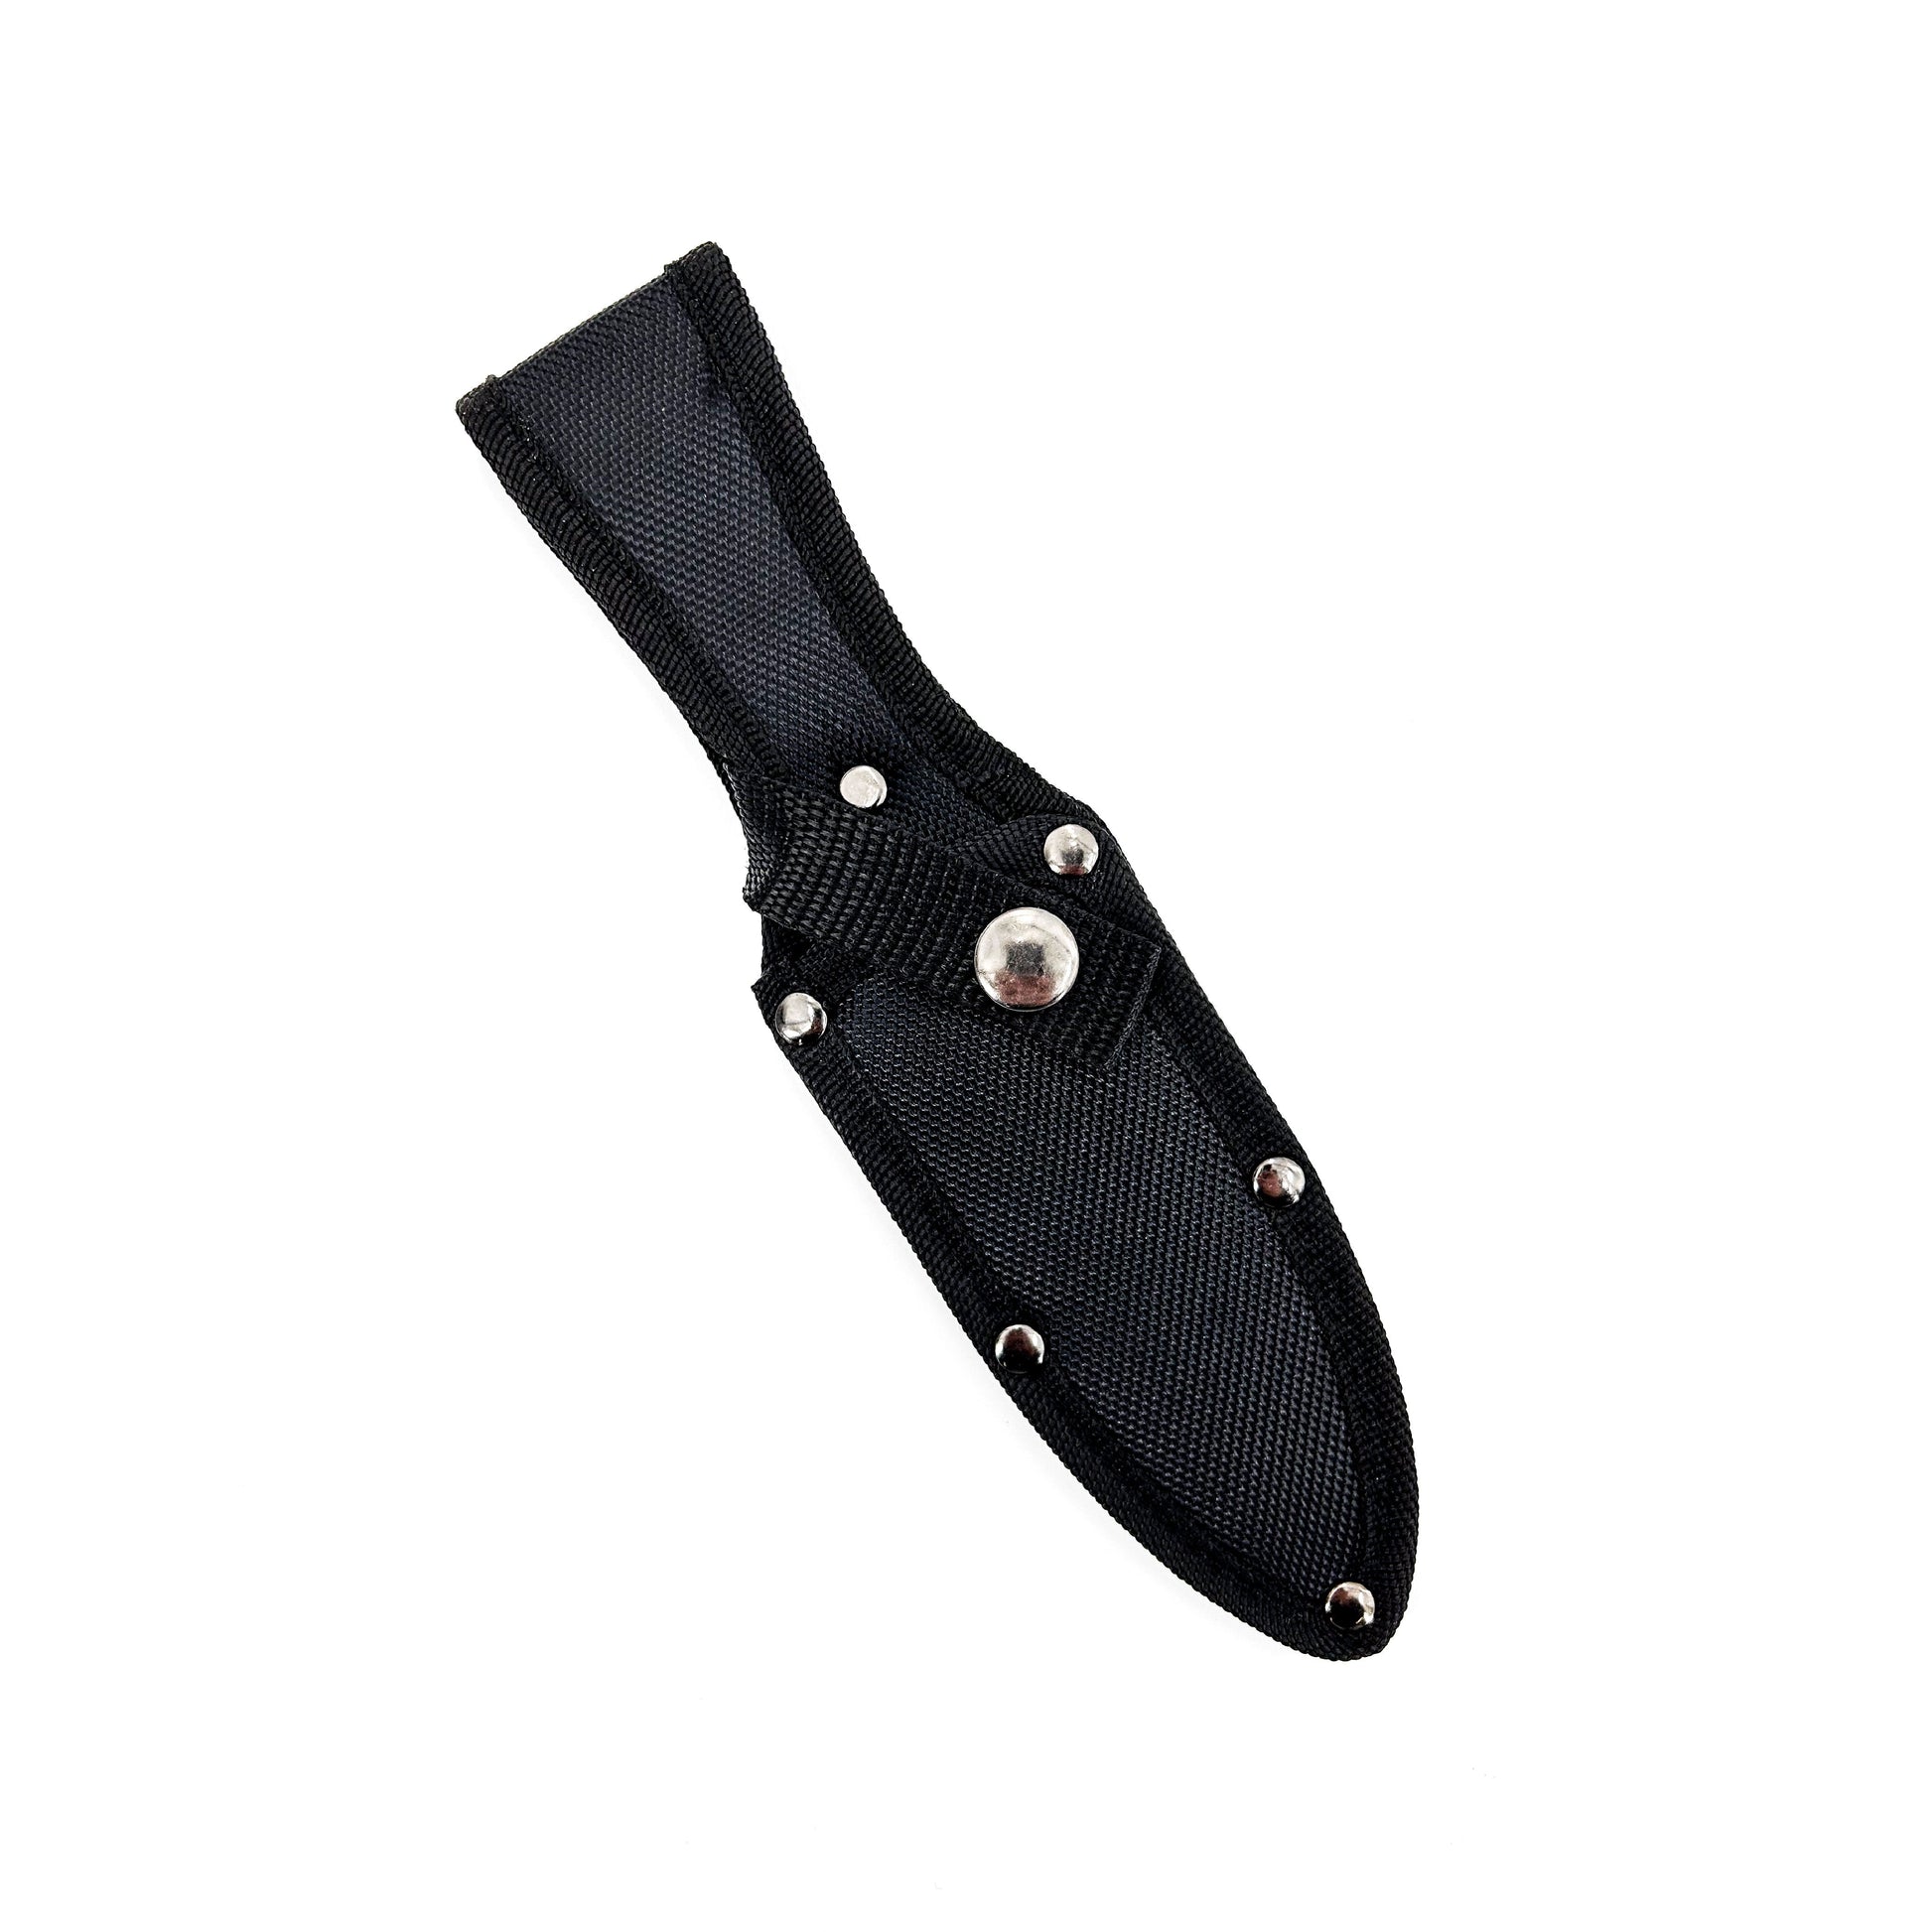 Mortality Rate Dagger Boot Knife-4